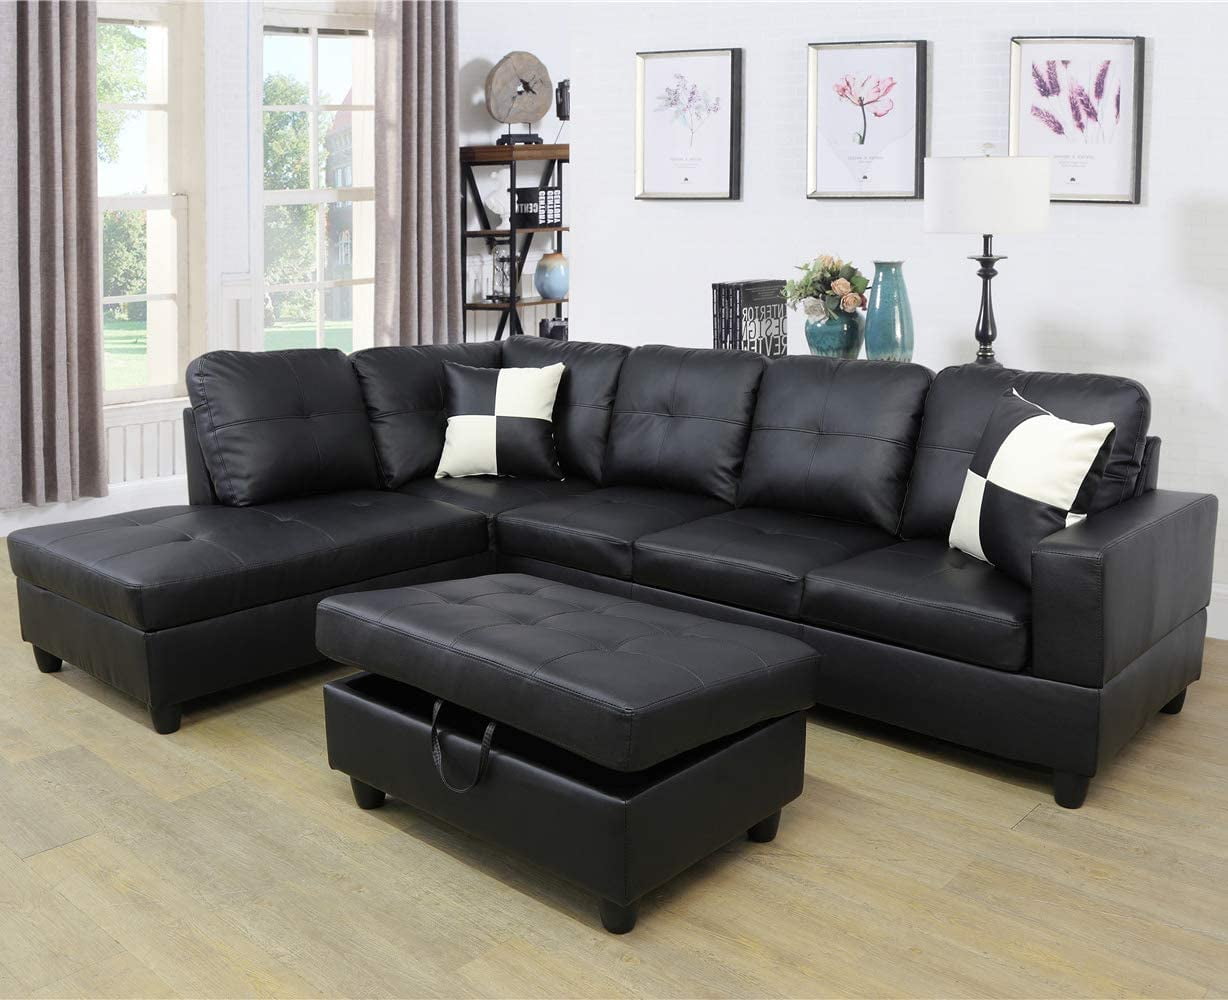 Piece Sectional Sofa Couch Set, L Shaped Black Leather Sofa